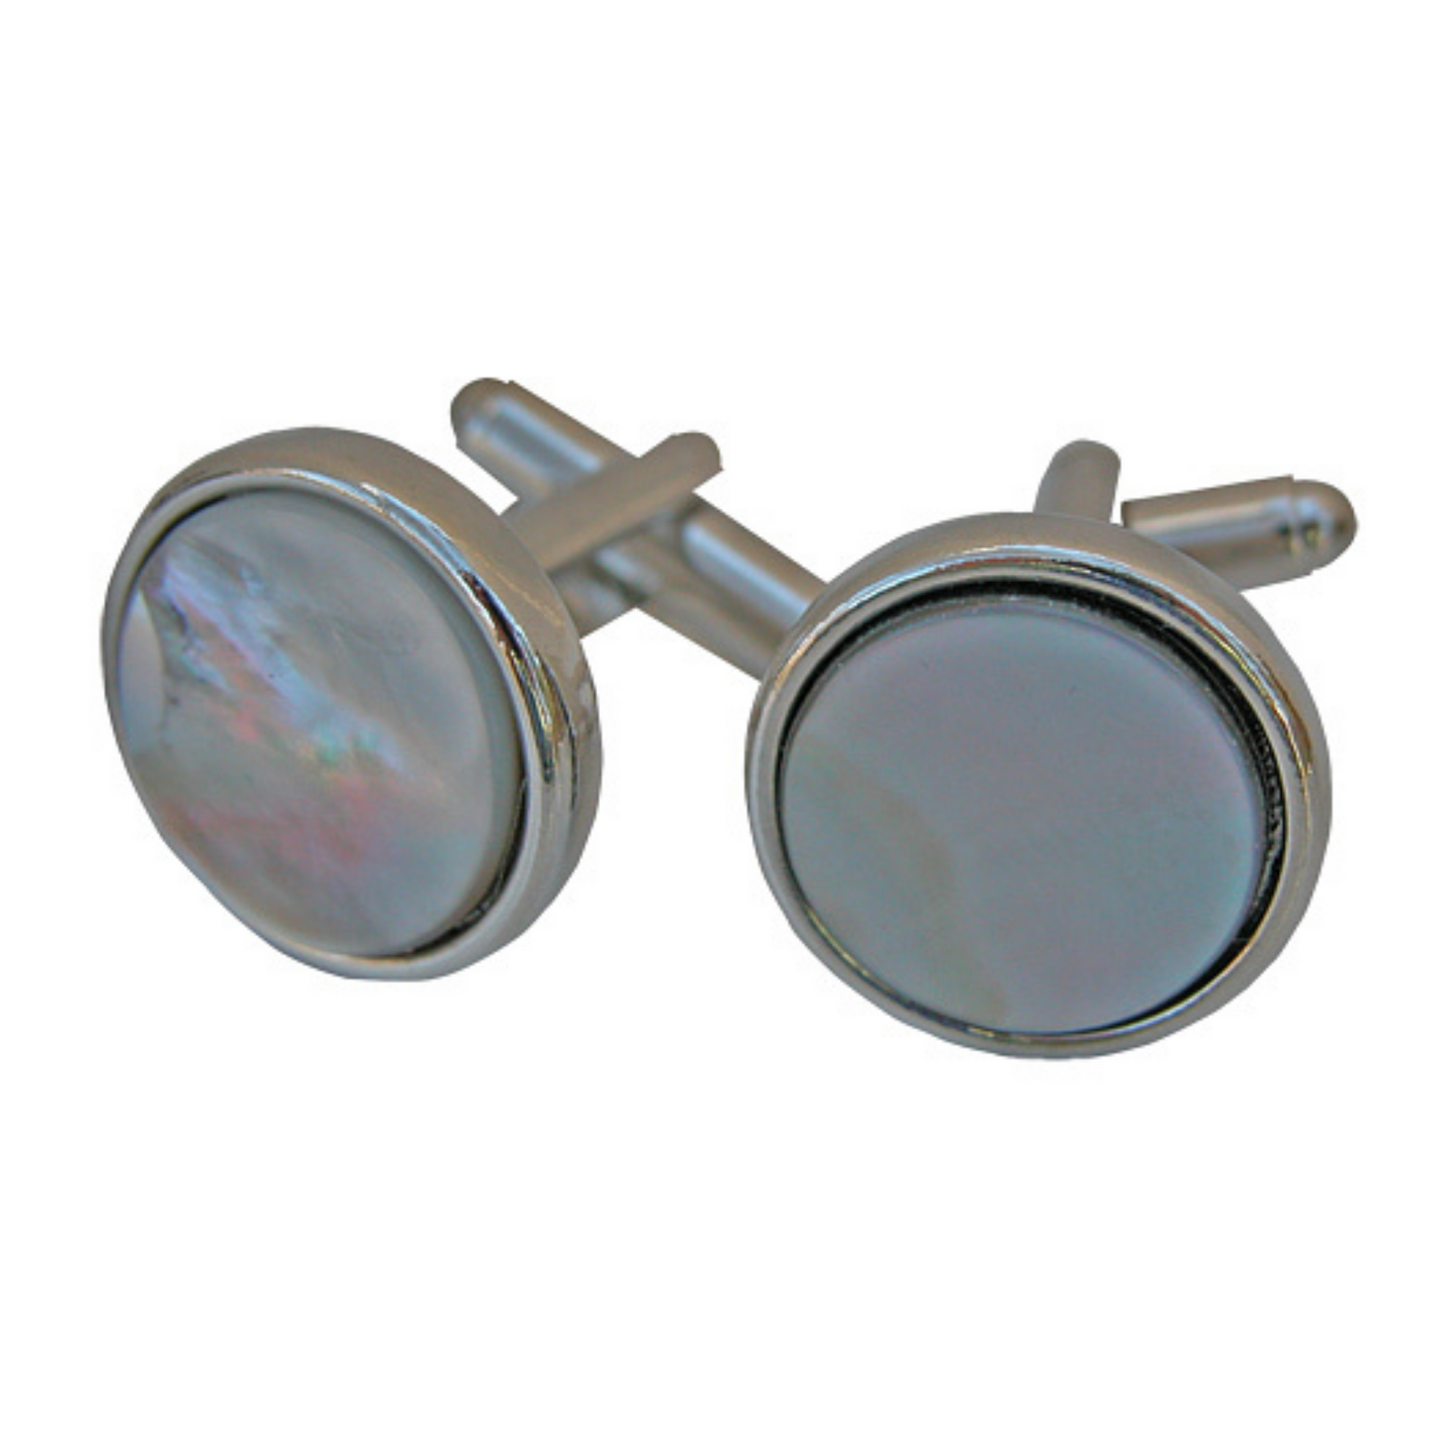 Black Mother of Pearl, Cuff Links, Round, Handmade by Classic Legacy